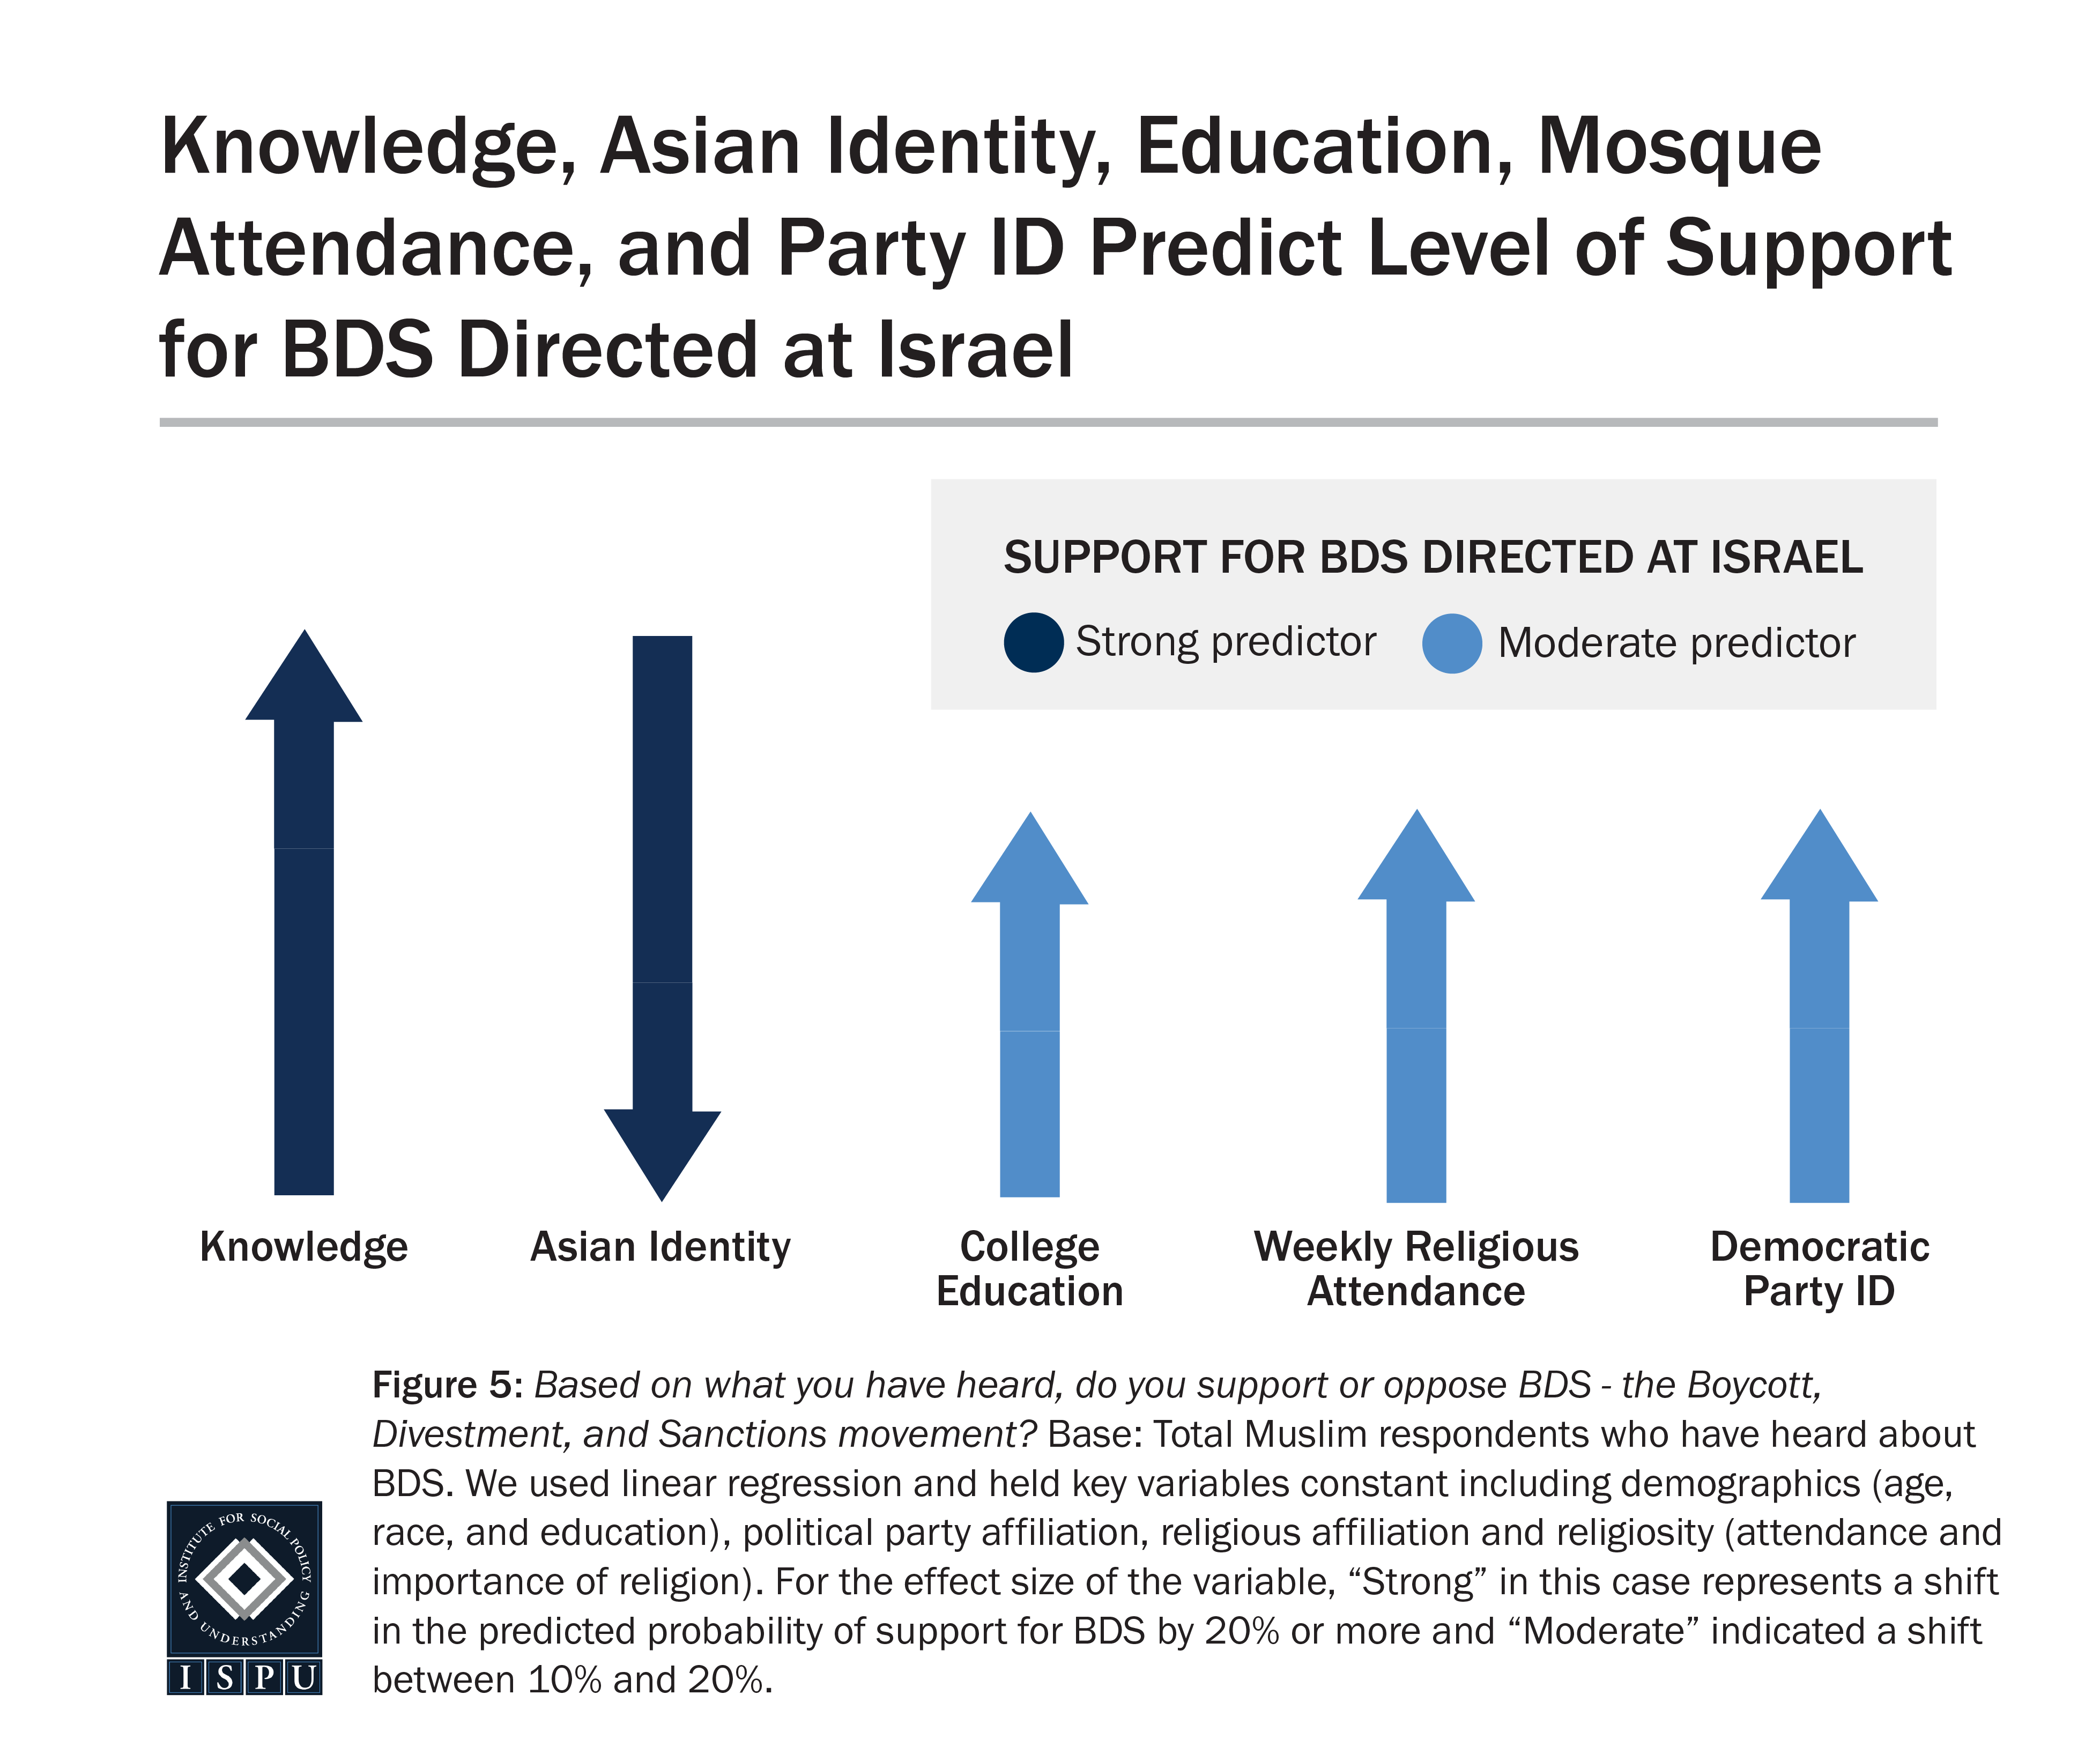 Graph displaying: A graphic showing significant predictors of support for the boycott, divestment, and sanctions movement directed as Israel among Muslims based on regression analysis. Knowledge about the movement is strongly associated with greater support while Asian identity is strongly associated with less support. College education, weekly religious attendance and democratic party affiliation are moderately associated with greater support.